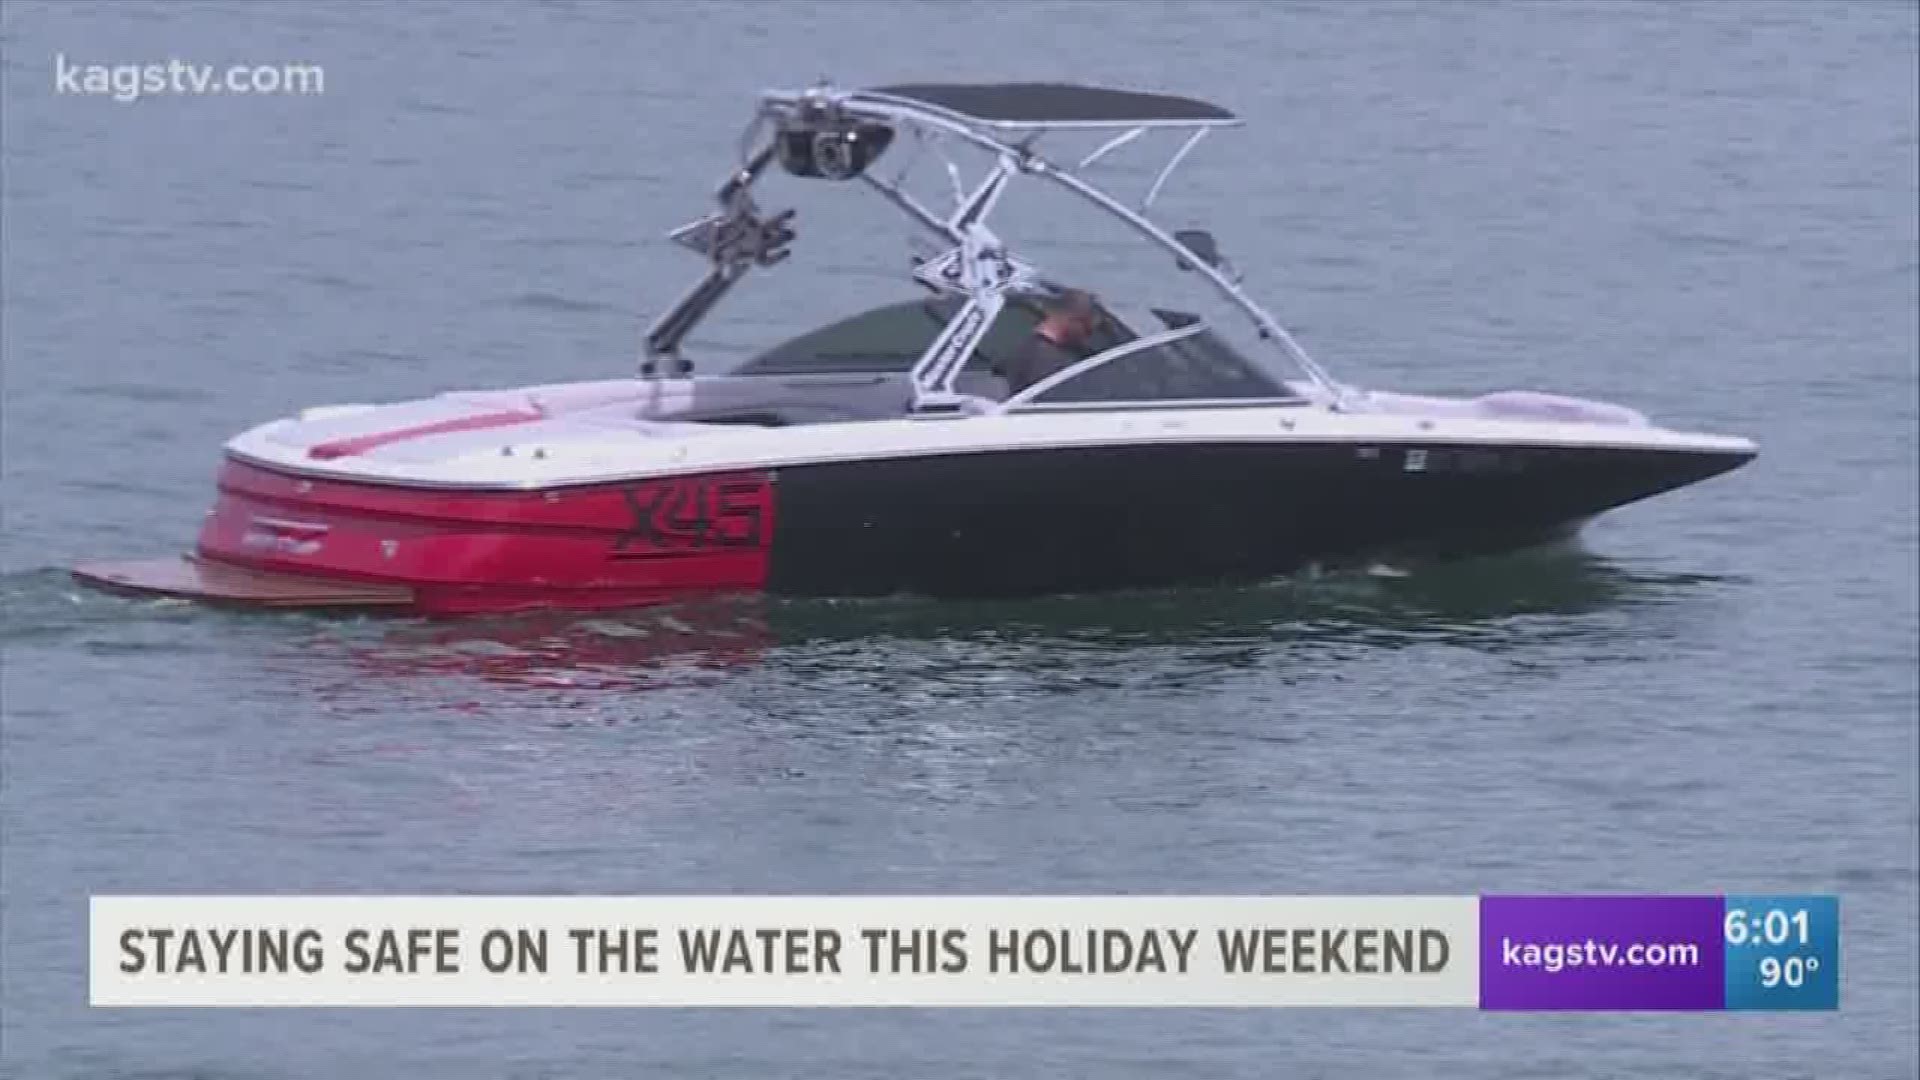 Summer is upon us and this weekend it will kick into full swing. With various activities summer provides, there are some safety concerns too, especially when out on the water. Here is Kerrie Hall with a very helpful tips to remember when out on the water